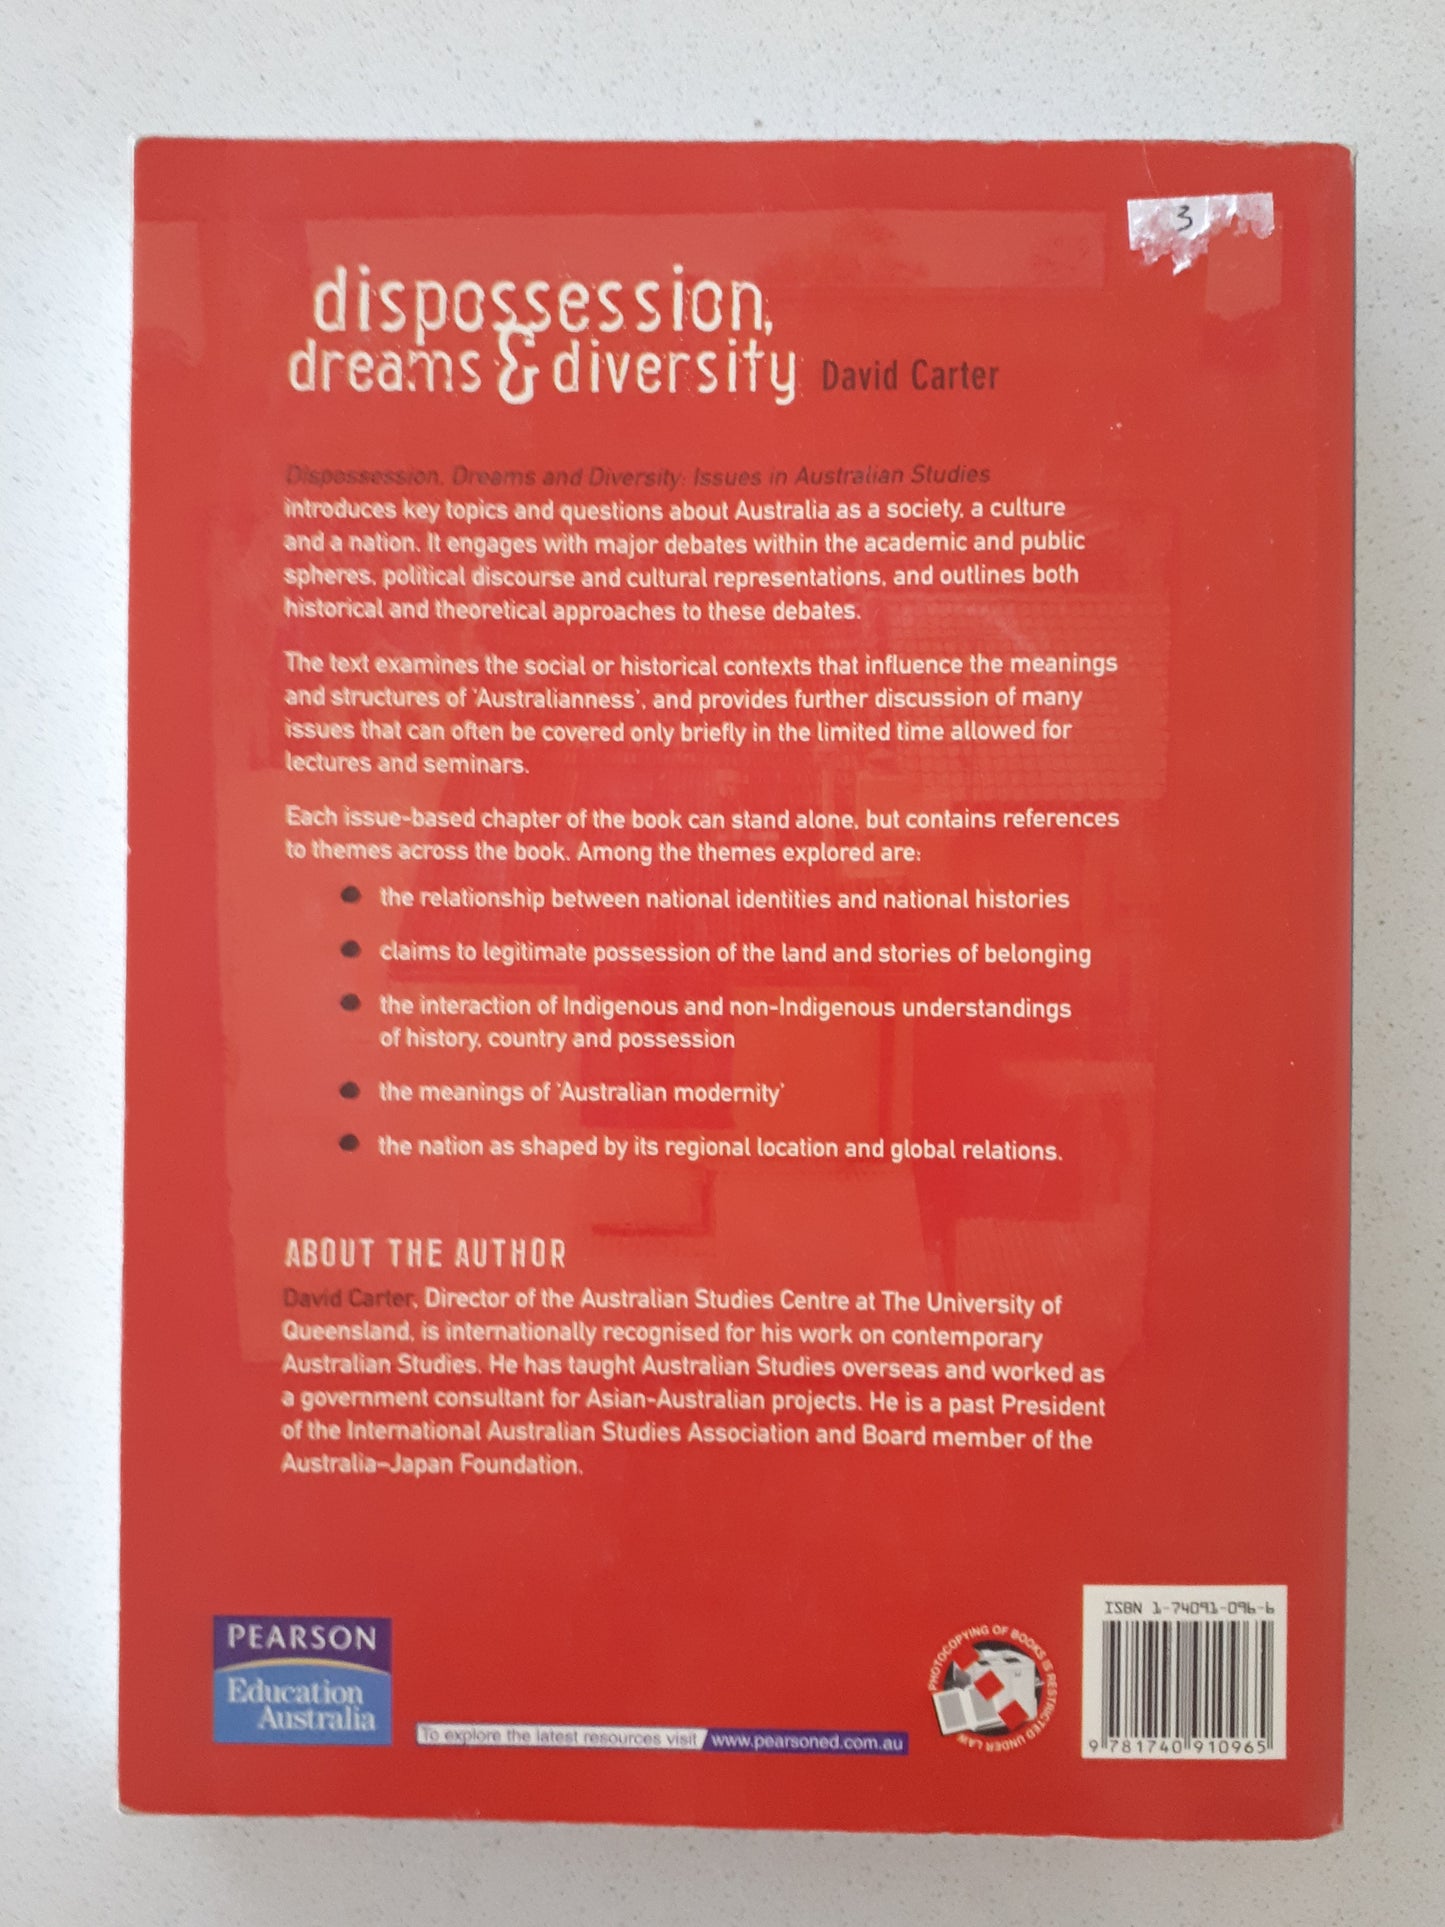 Dispossession, Dreams & Diversity by David Carter